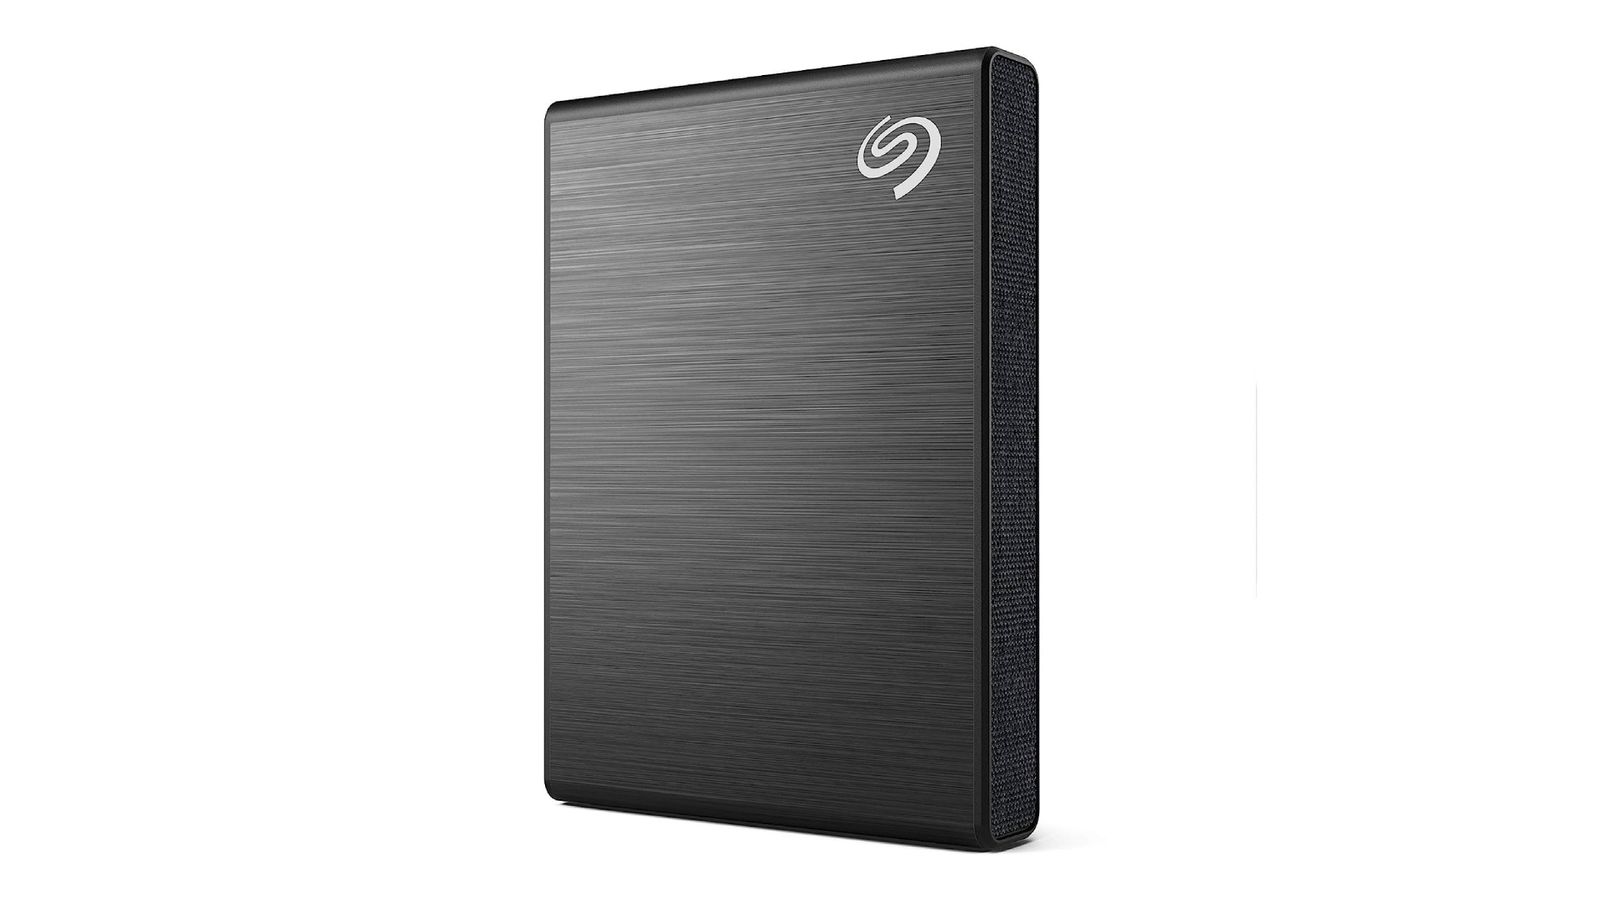 Seagate One Touch product image of an upright, rectangular, dark grey hard drive.